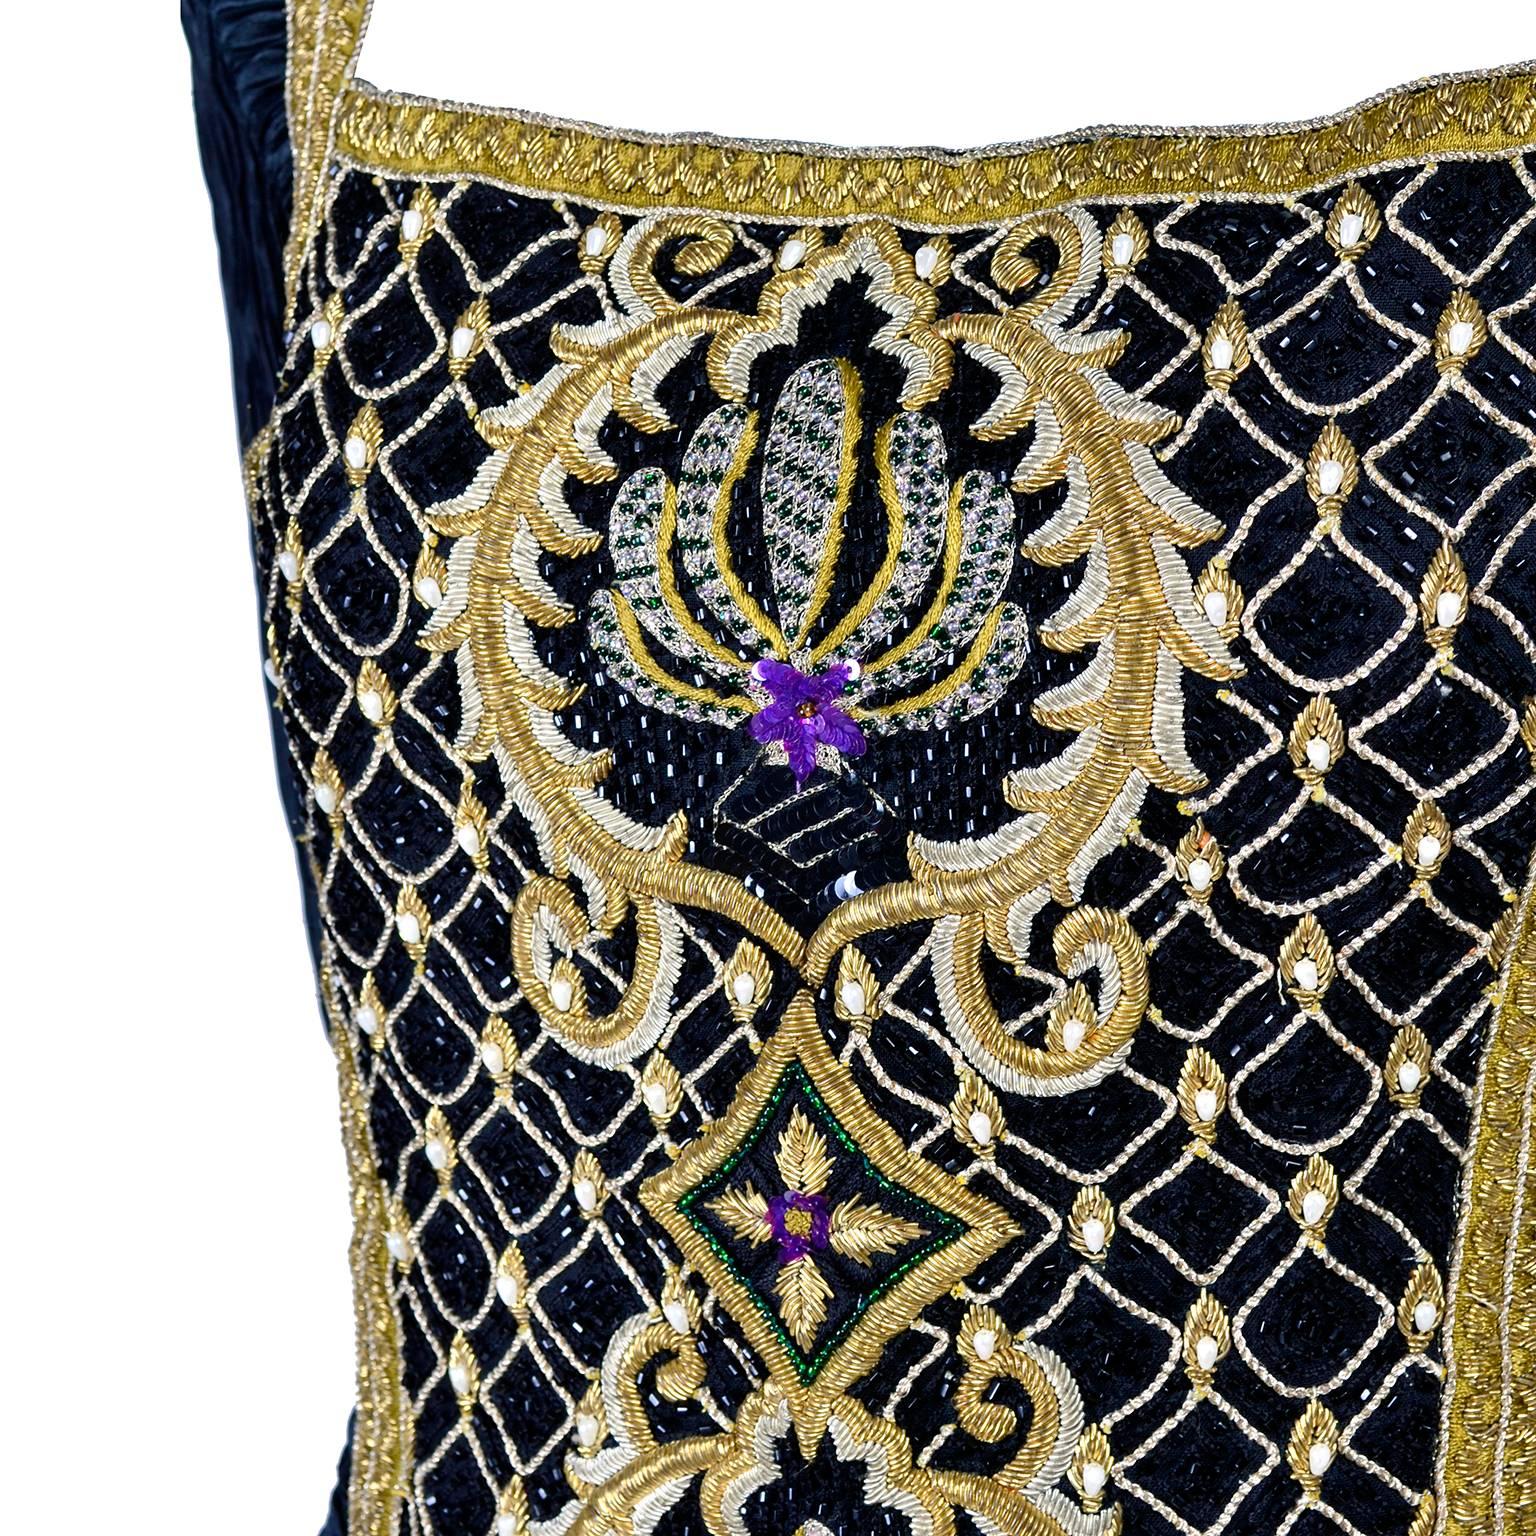 This Mary McFadden Couture Vintage black dress is beautifully pleated in Fortuny style with a heavily embellished bodice. The bodice has gold braid, thick metallic gold embroidery, beading, tIny pearls and sequins. This sensational evening gown has